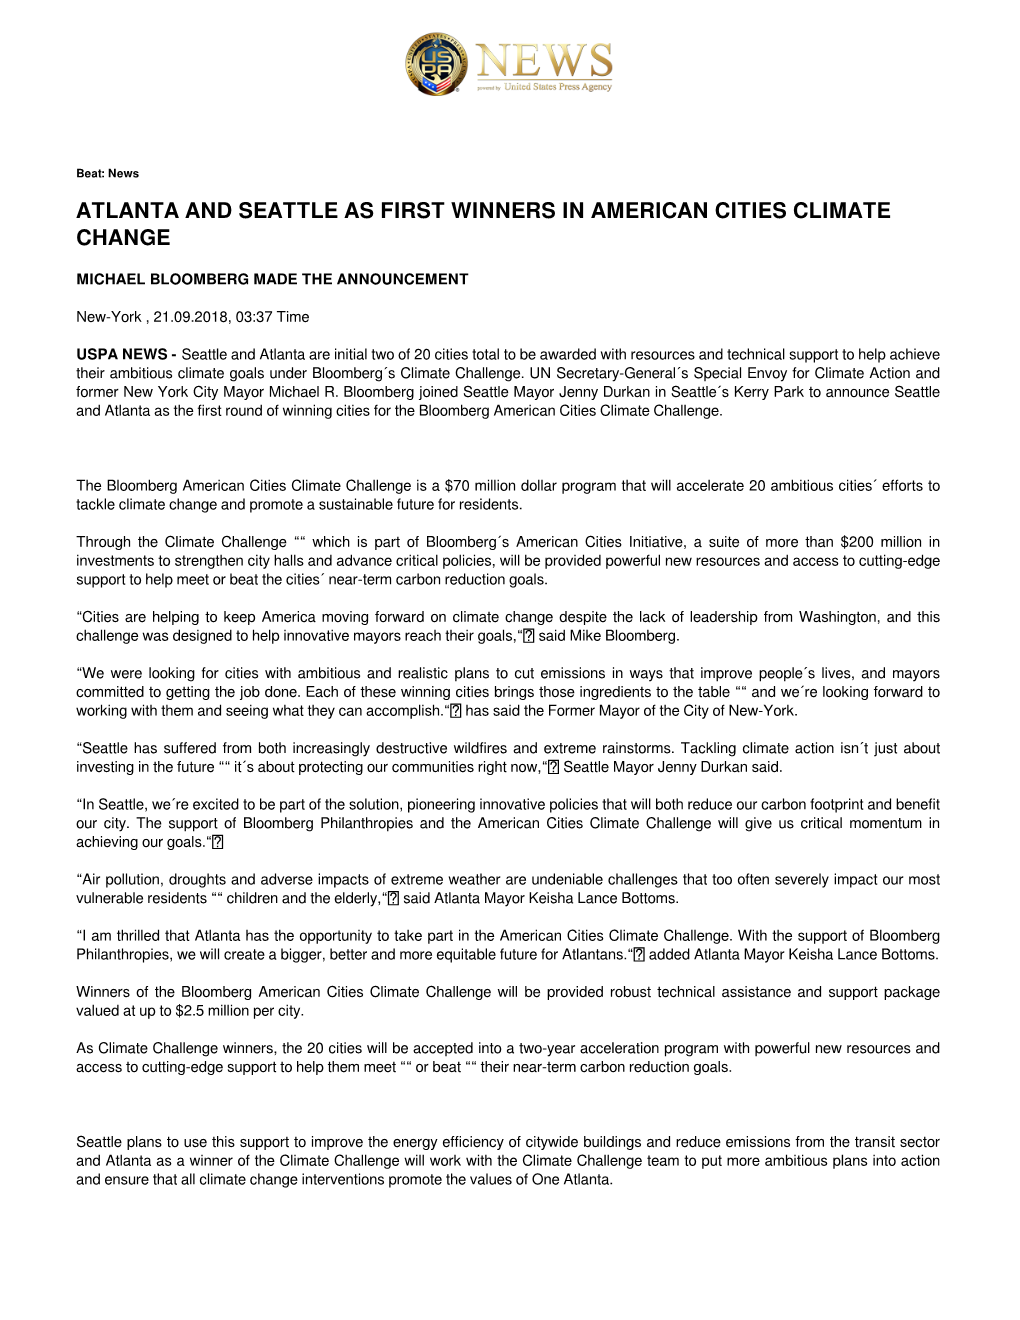 Atlanta and Seattle As First Winners in American Cities Climate Change